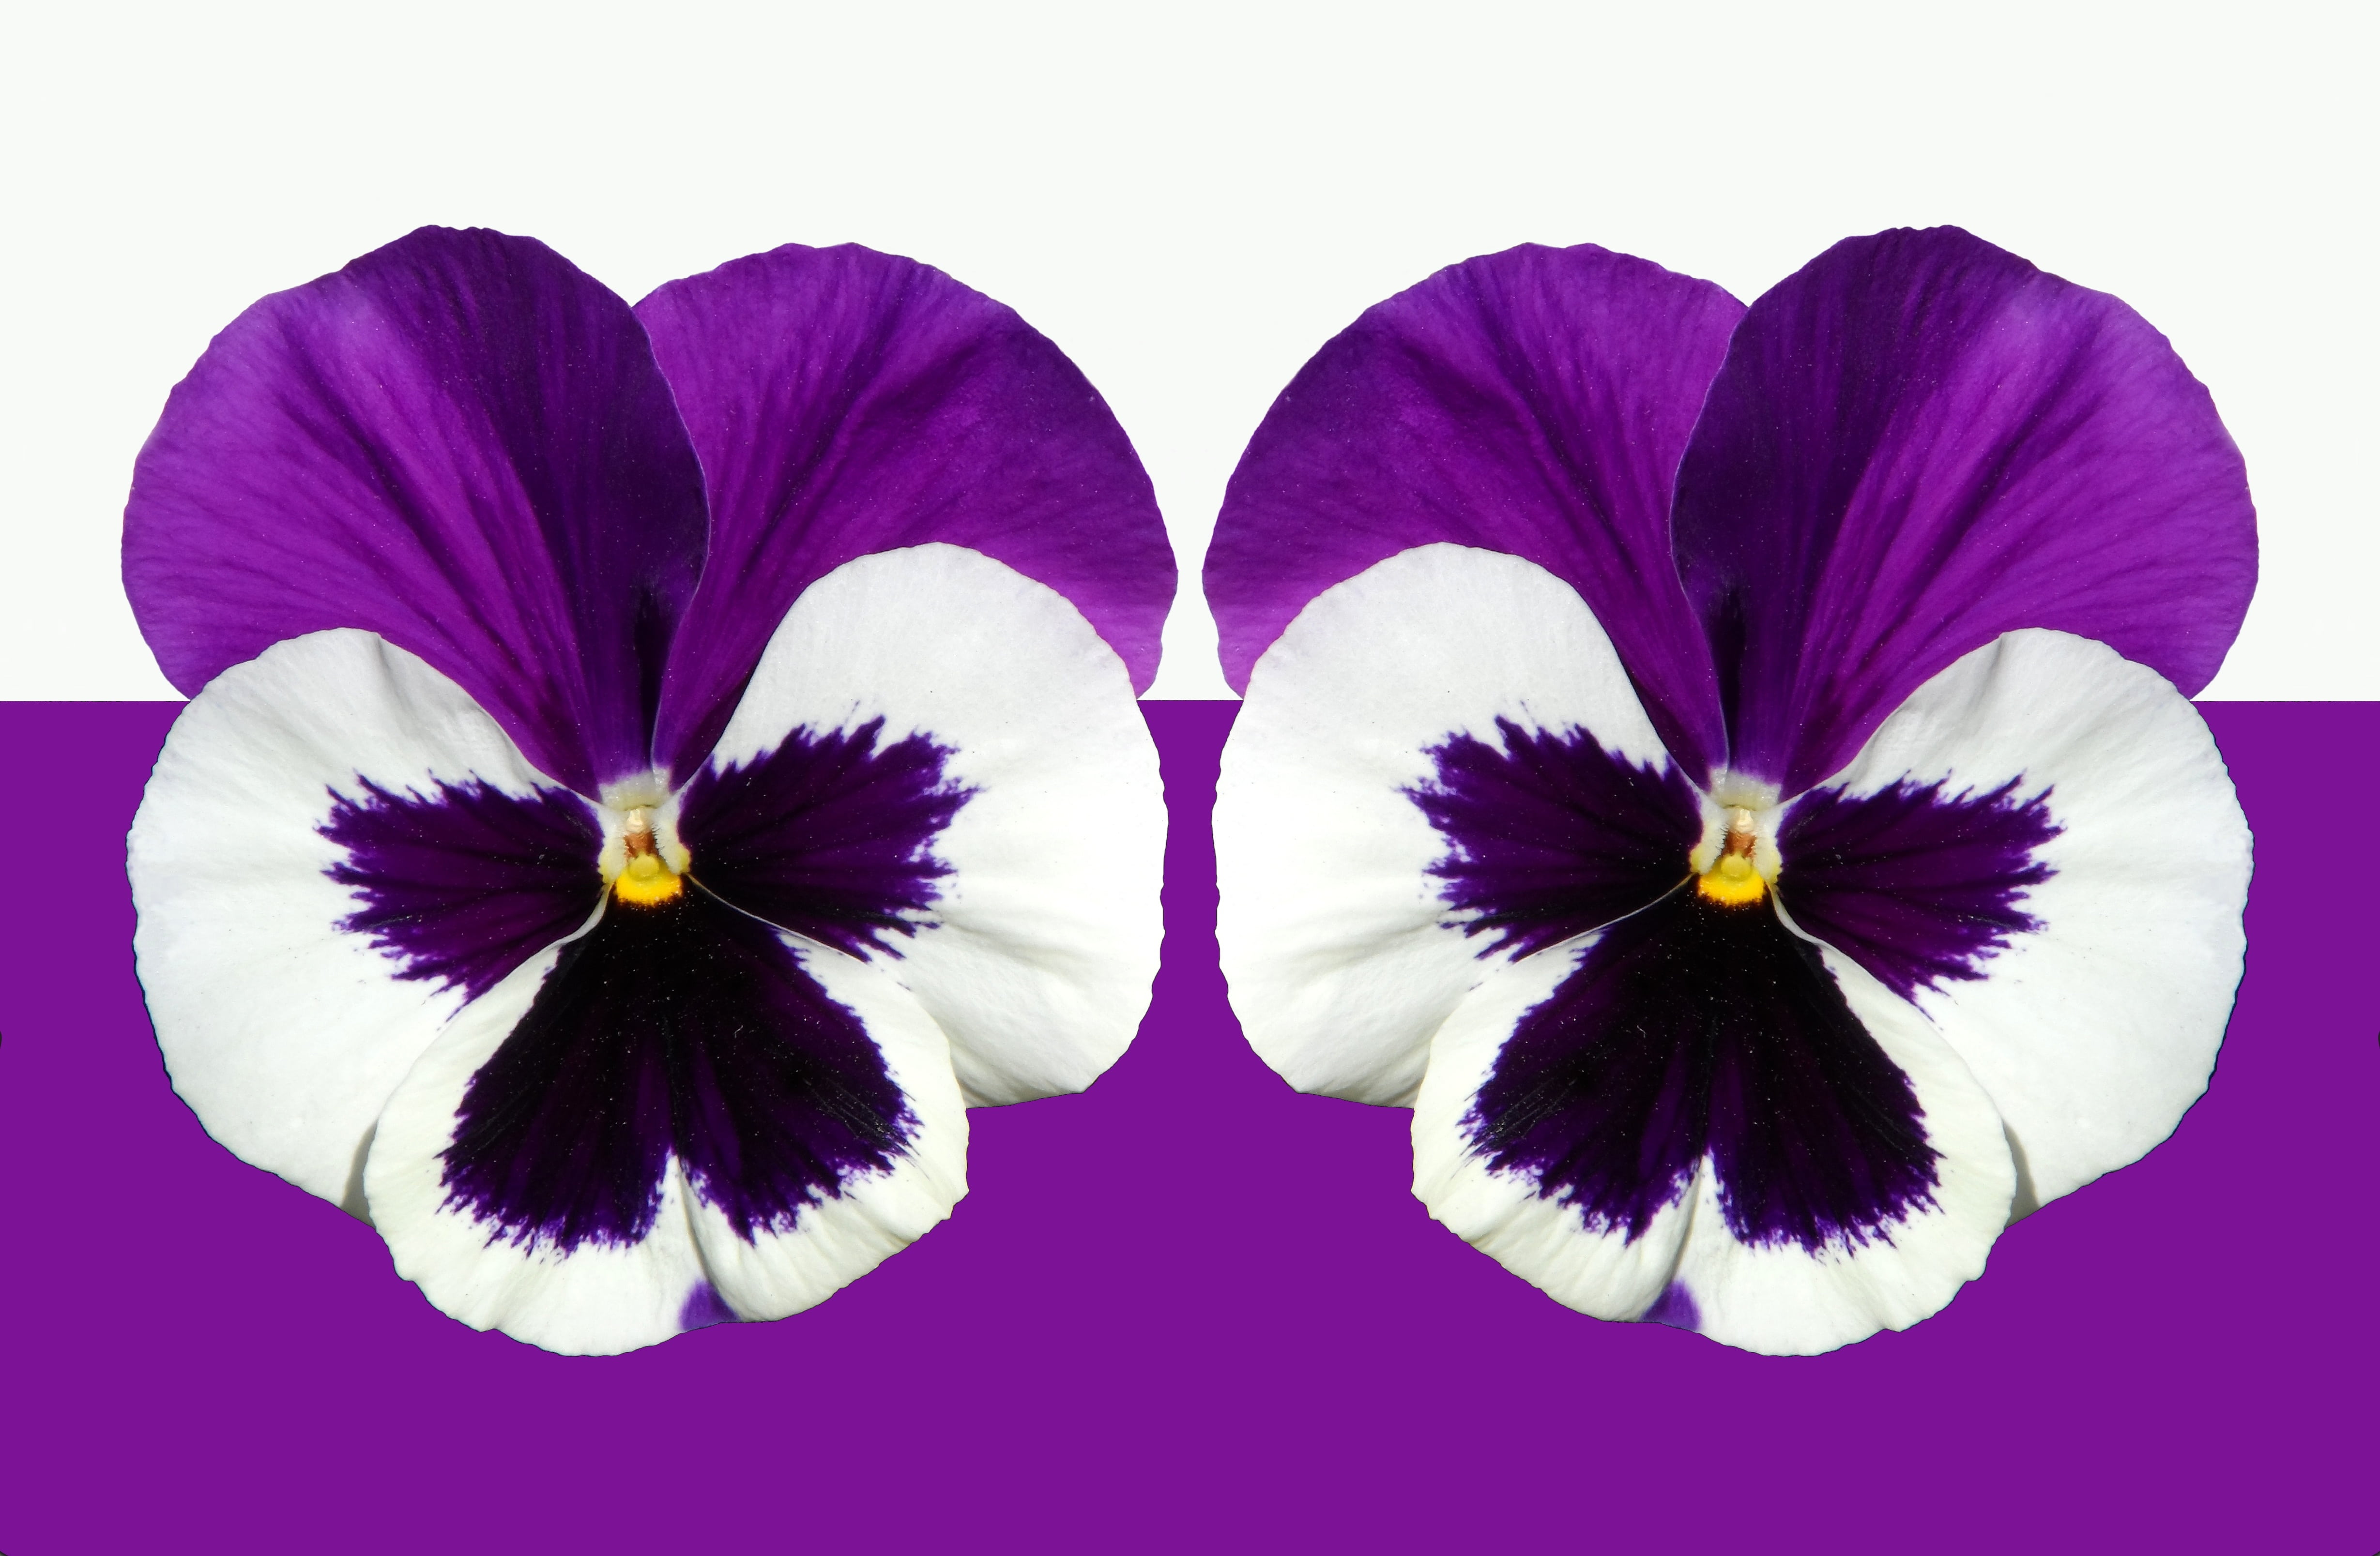 purple and white flowers, pansy, violet, light, blossom, bloom